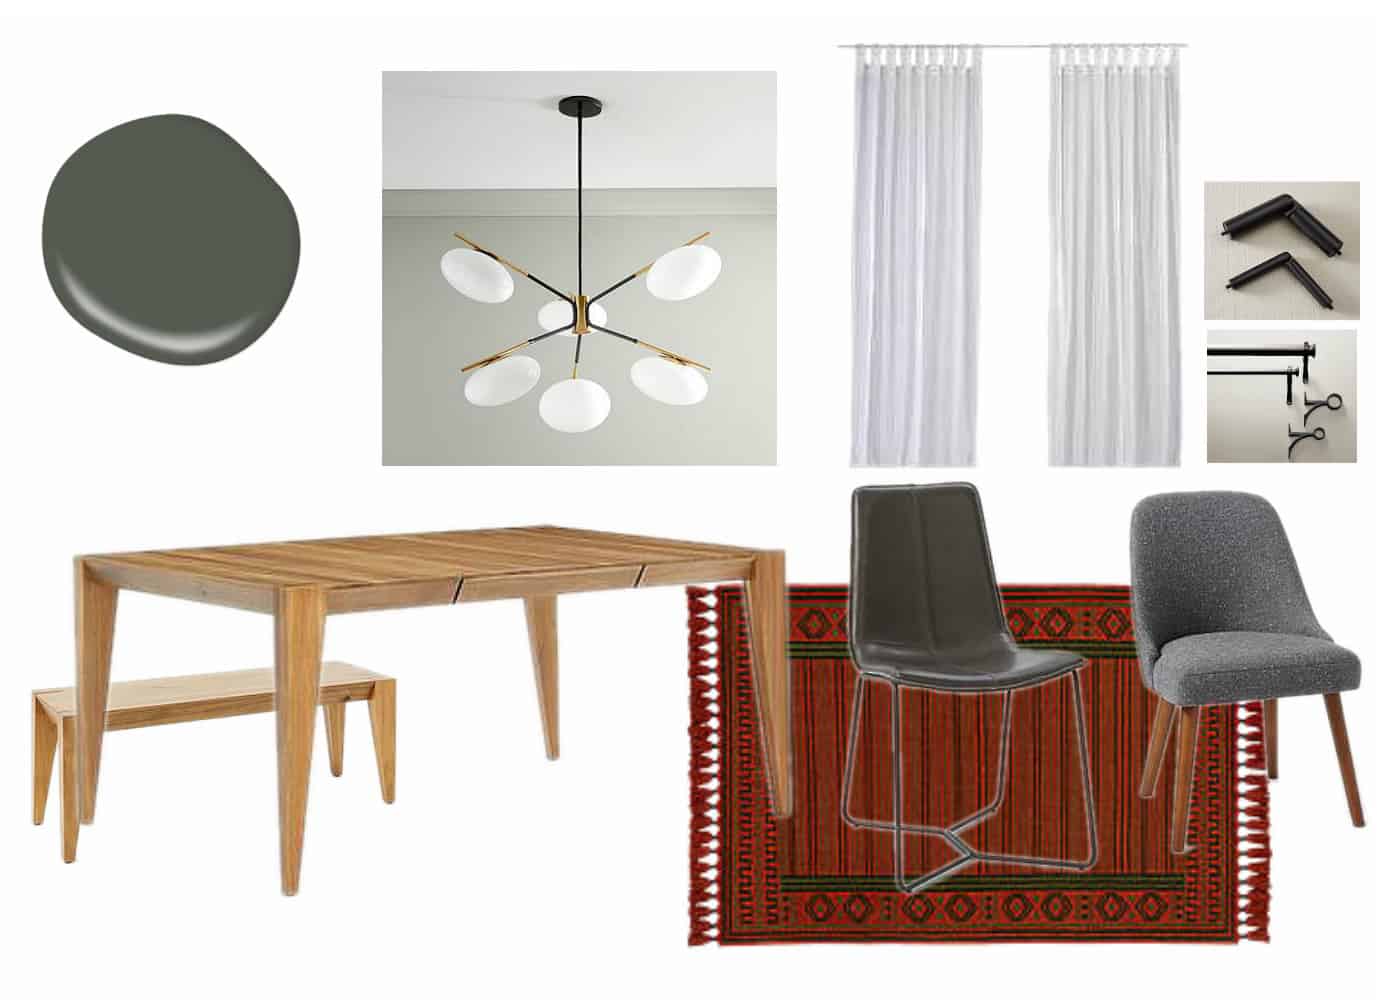 Mid Century Modern Dining Room Ideas put on a mood board to help with the design of a dining room in a house